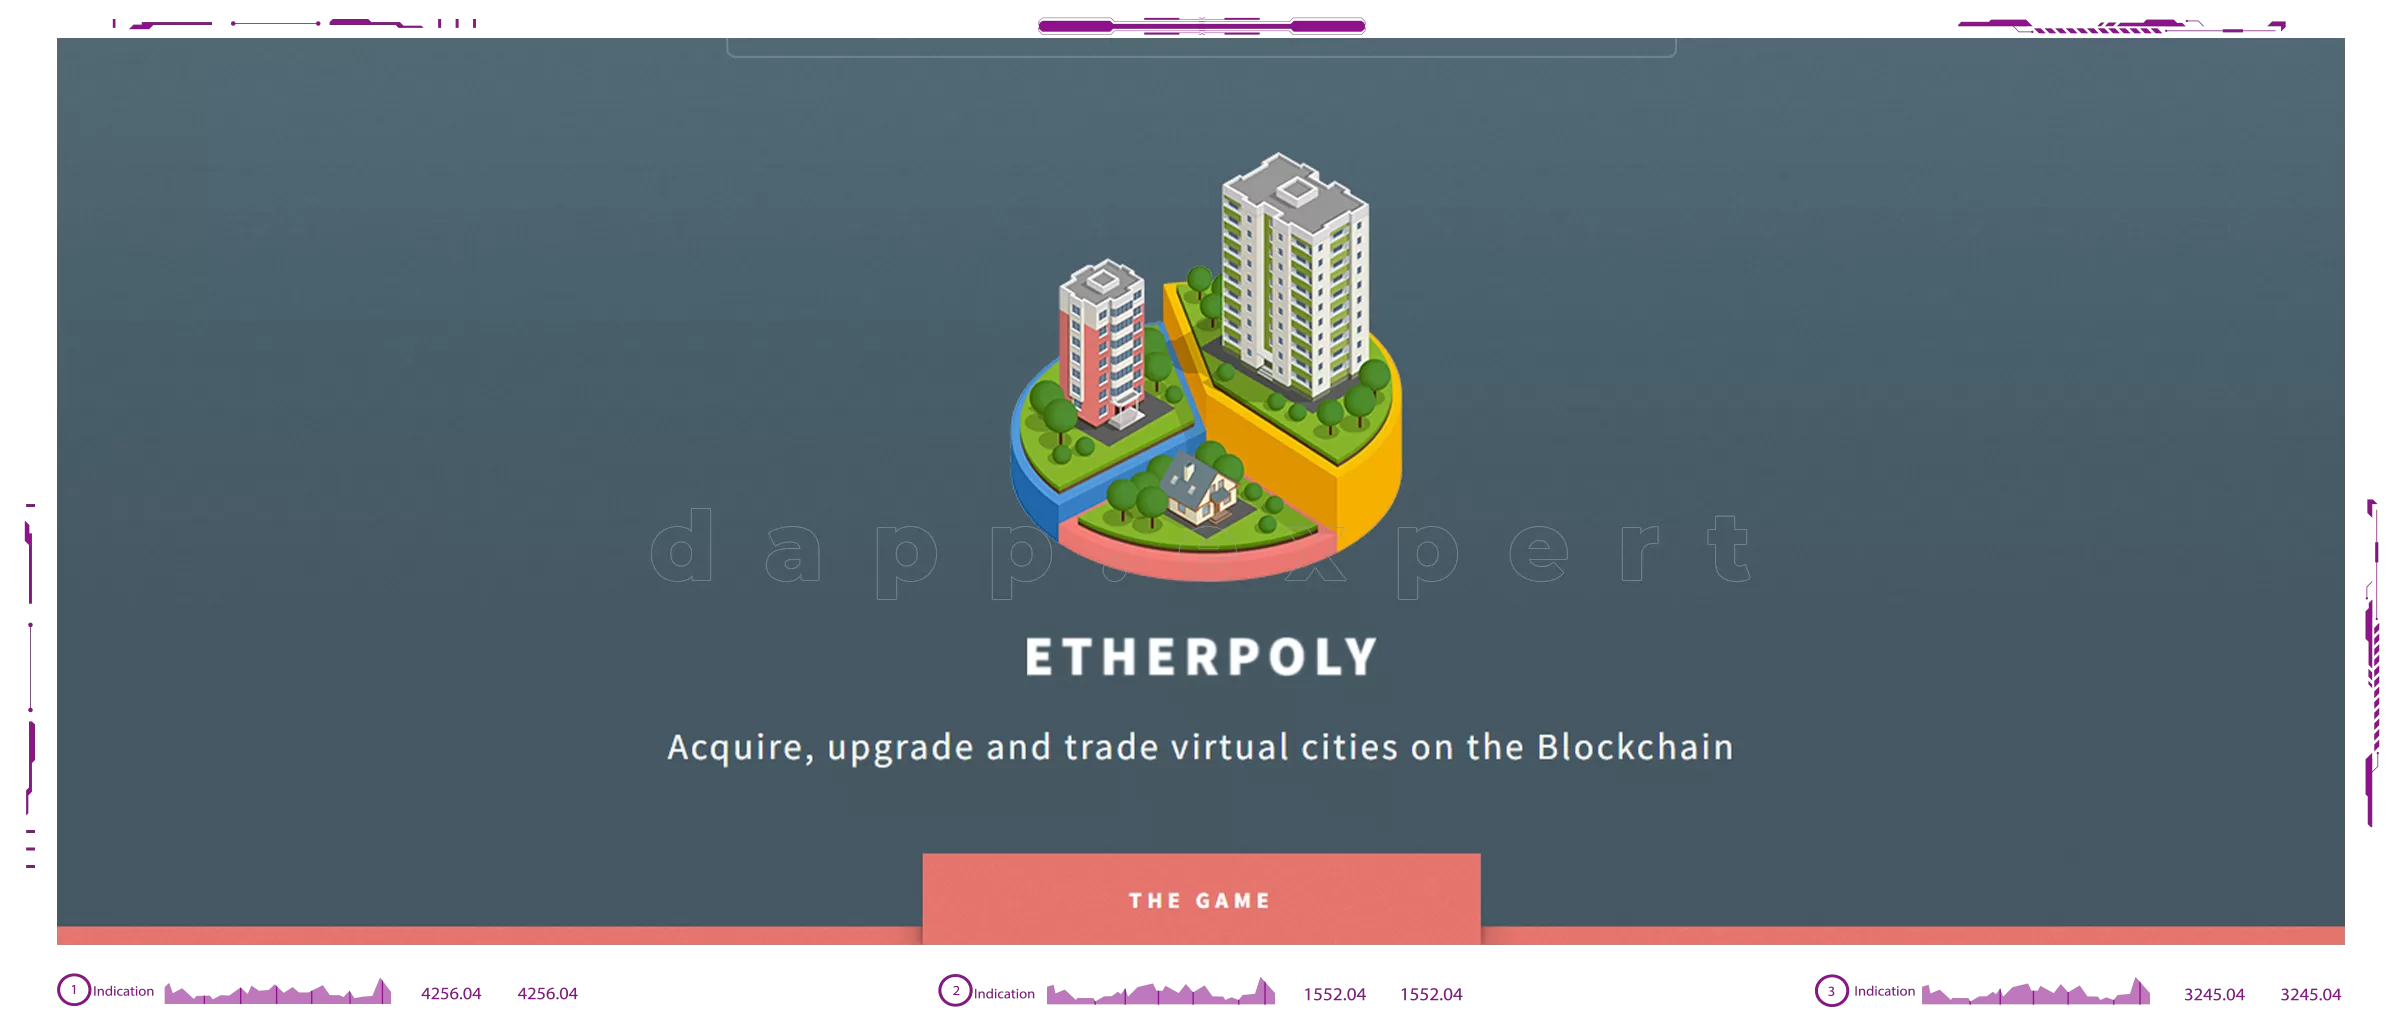 Etherpoly dapps